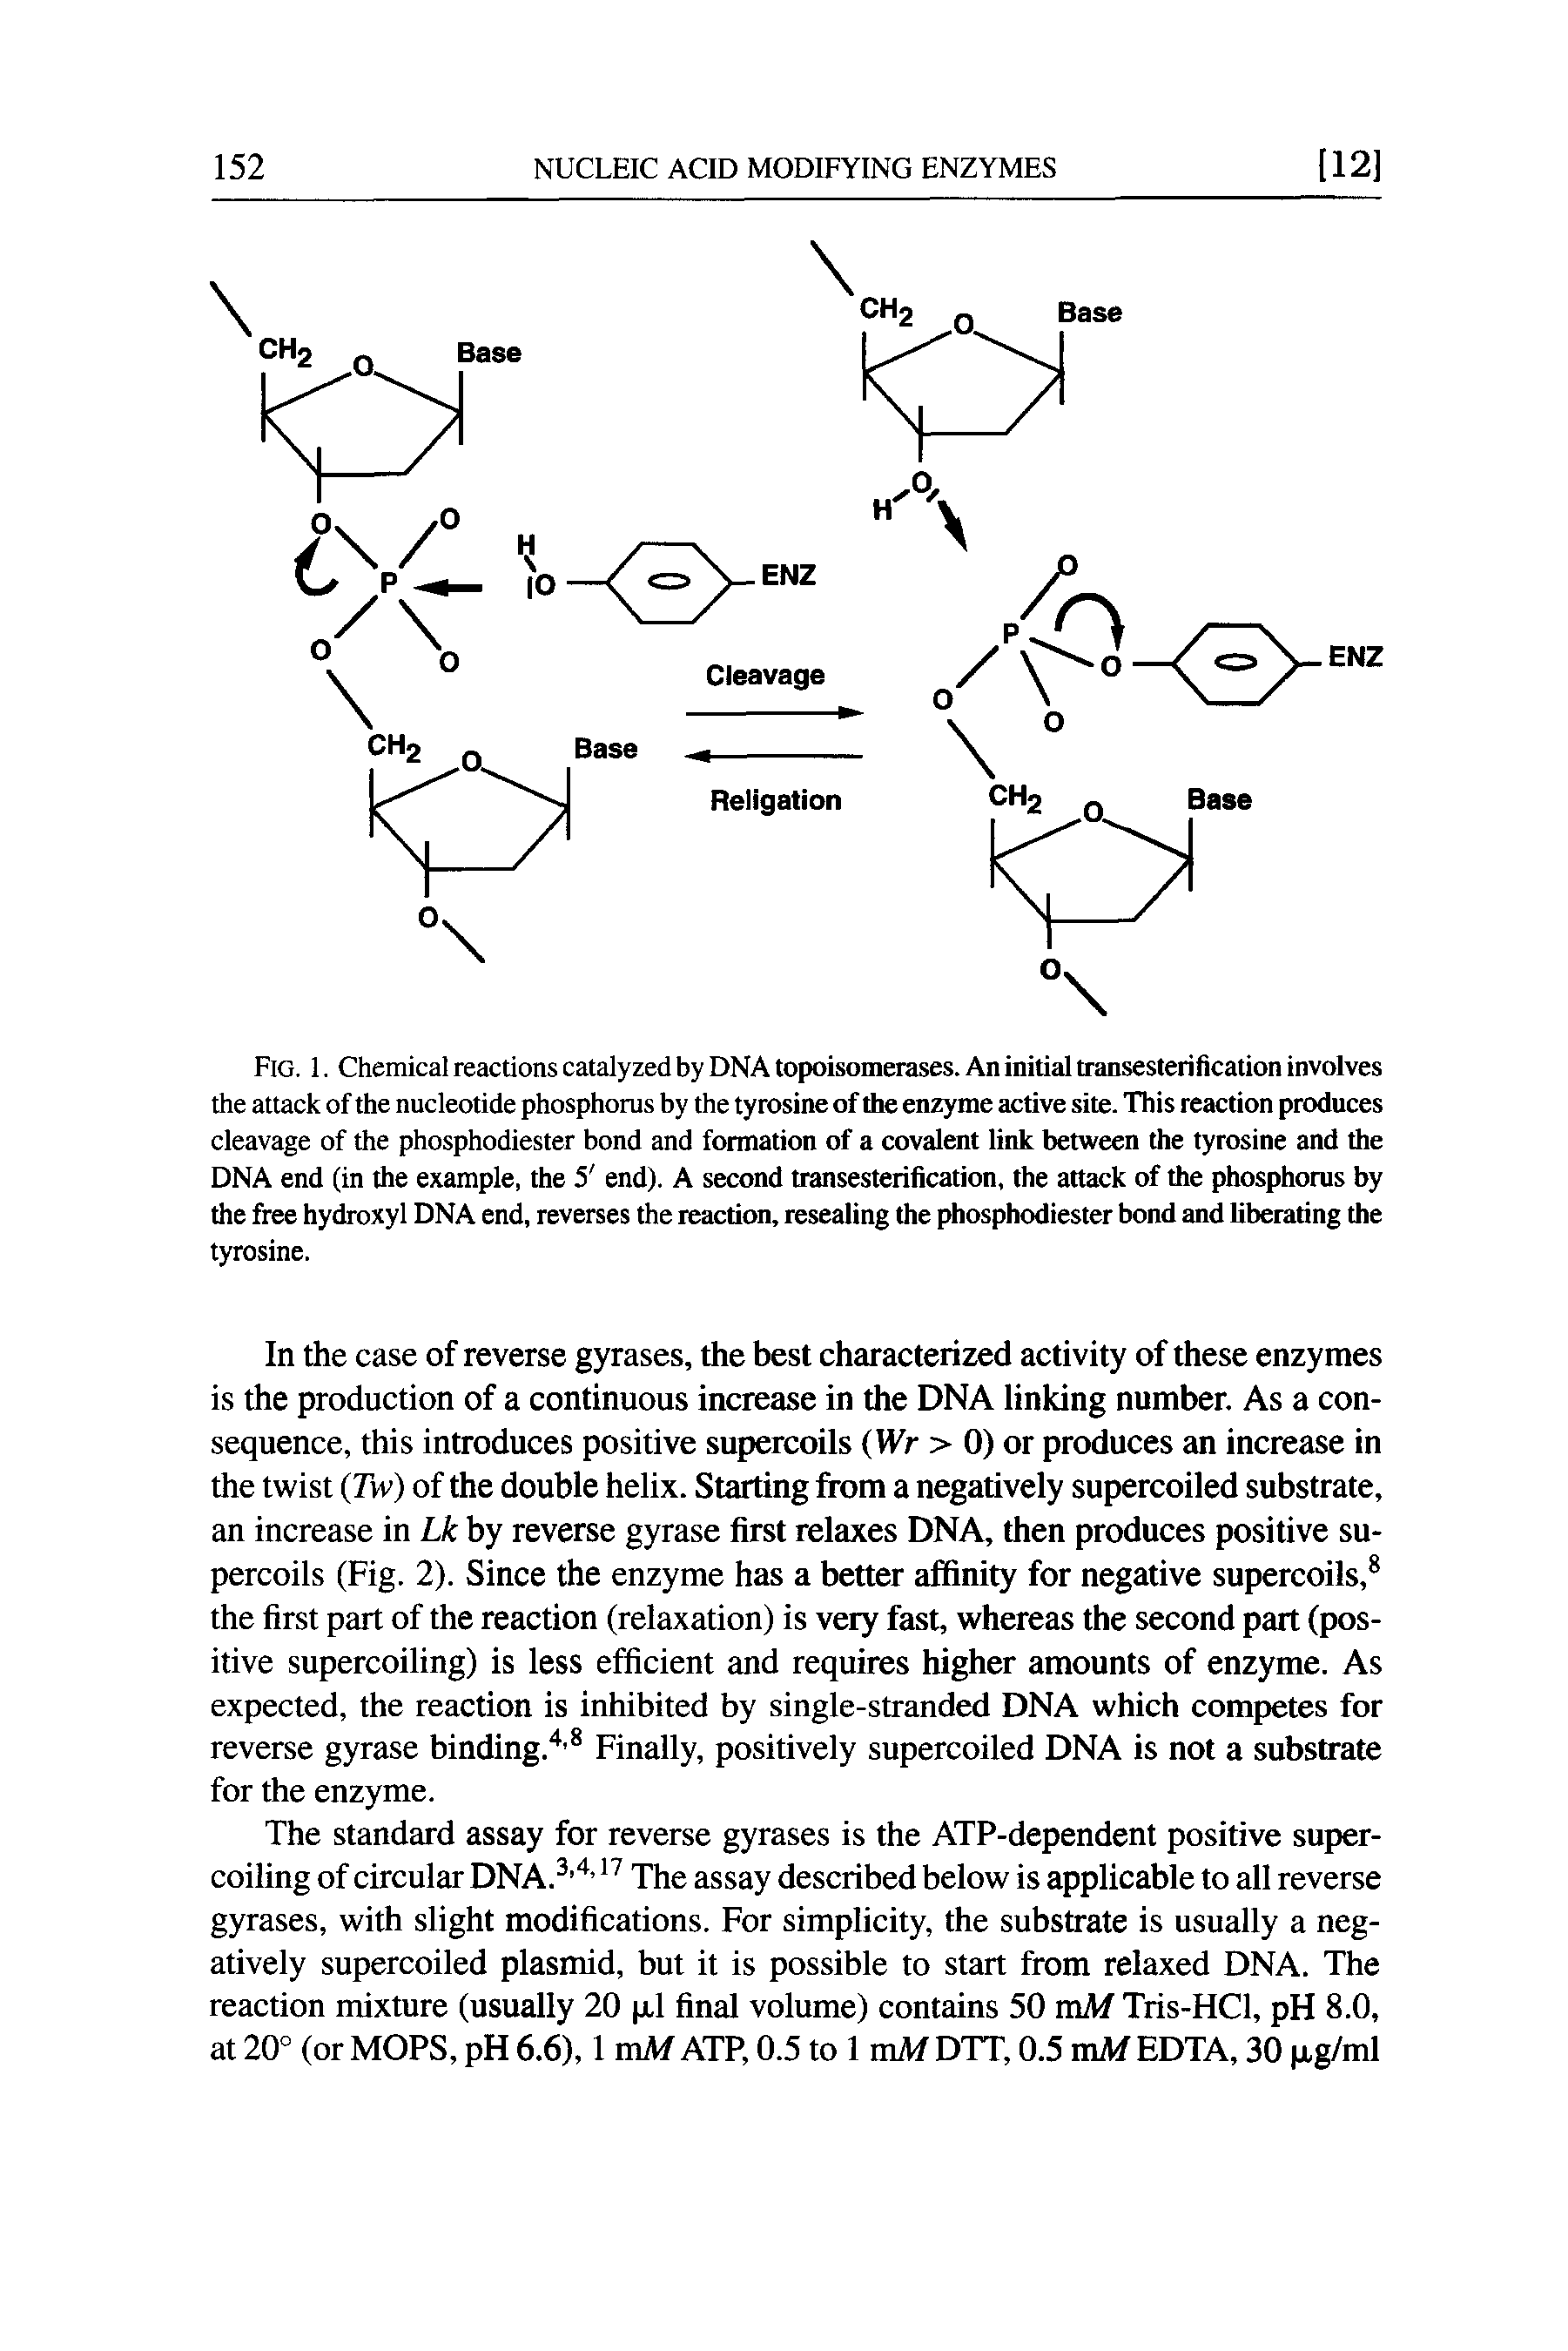 Fig. 1. Chemical reactions catalyzed by DNA topoisomerases. An initial transesterilication involves the attack of the nucleotide phosphorus by the tyrosine of the enzyme active site. This reaction produces cleavage of the phosphodiester bond and formation of a covalent link between the tyrosine and the DNA end (in the example, the 5 end). A second transesterilication, the attack of the phosphorus by the free hydroxyl DNA end, reverses the reaction, resealing the phosphodiester bond and liberating the tyrosine.